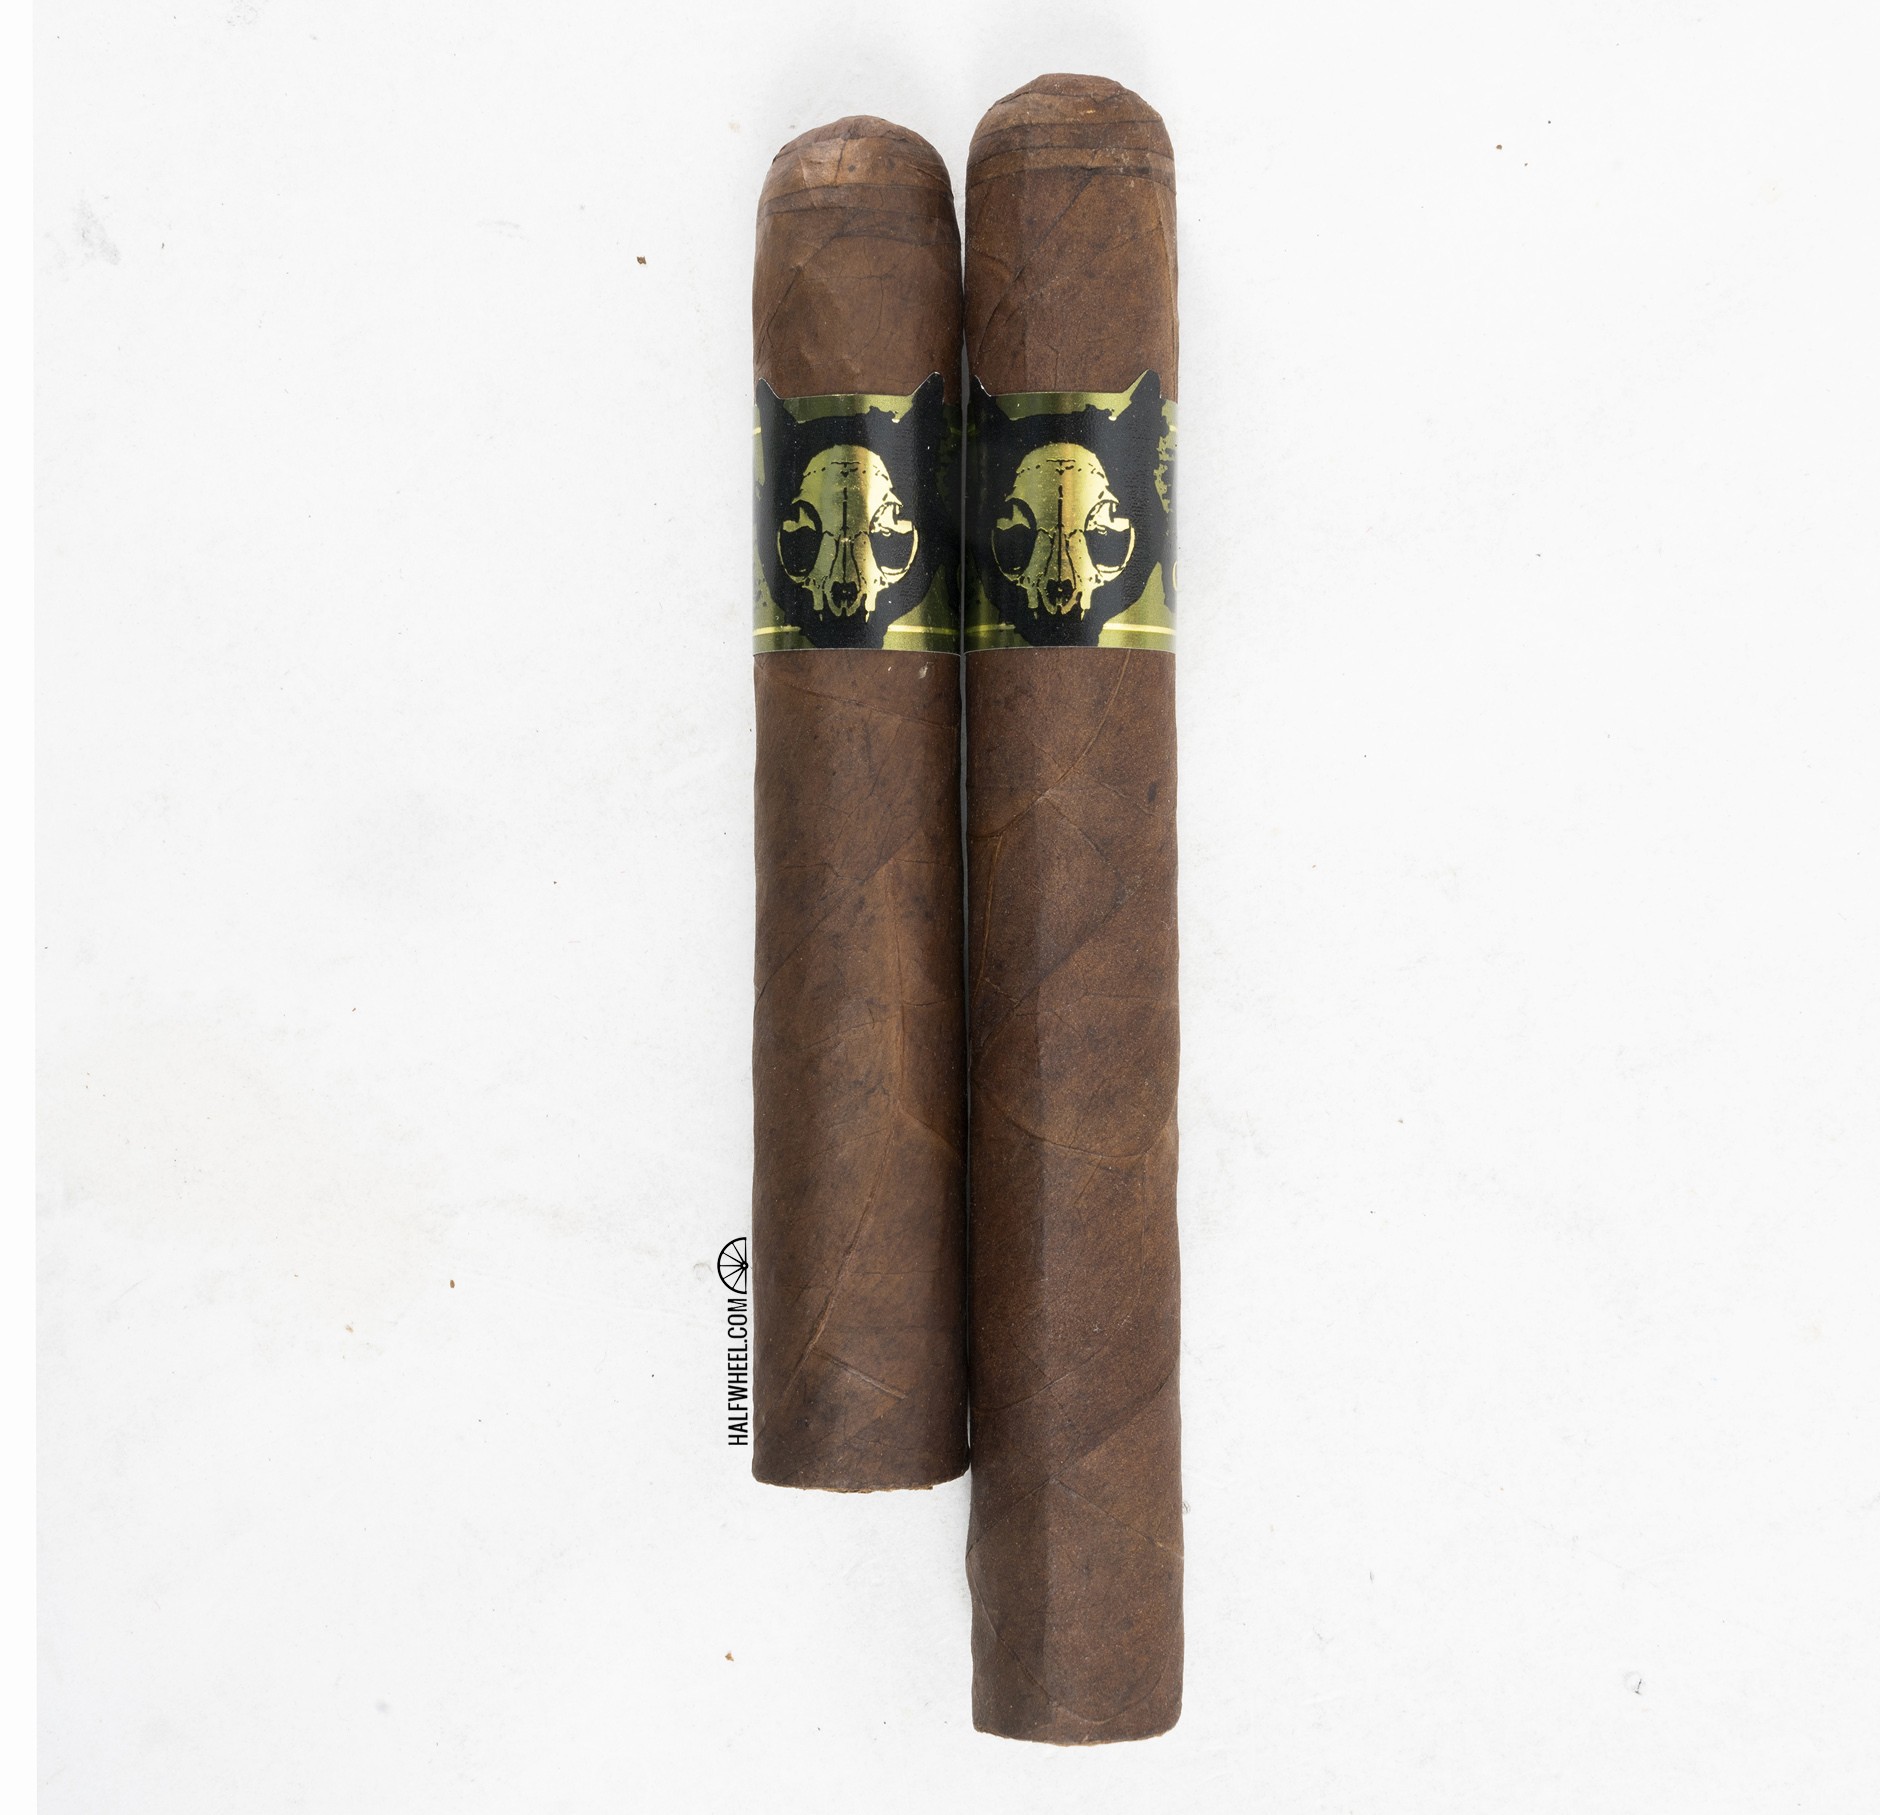 Robusto In English Meaning